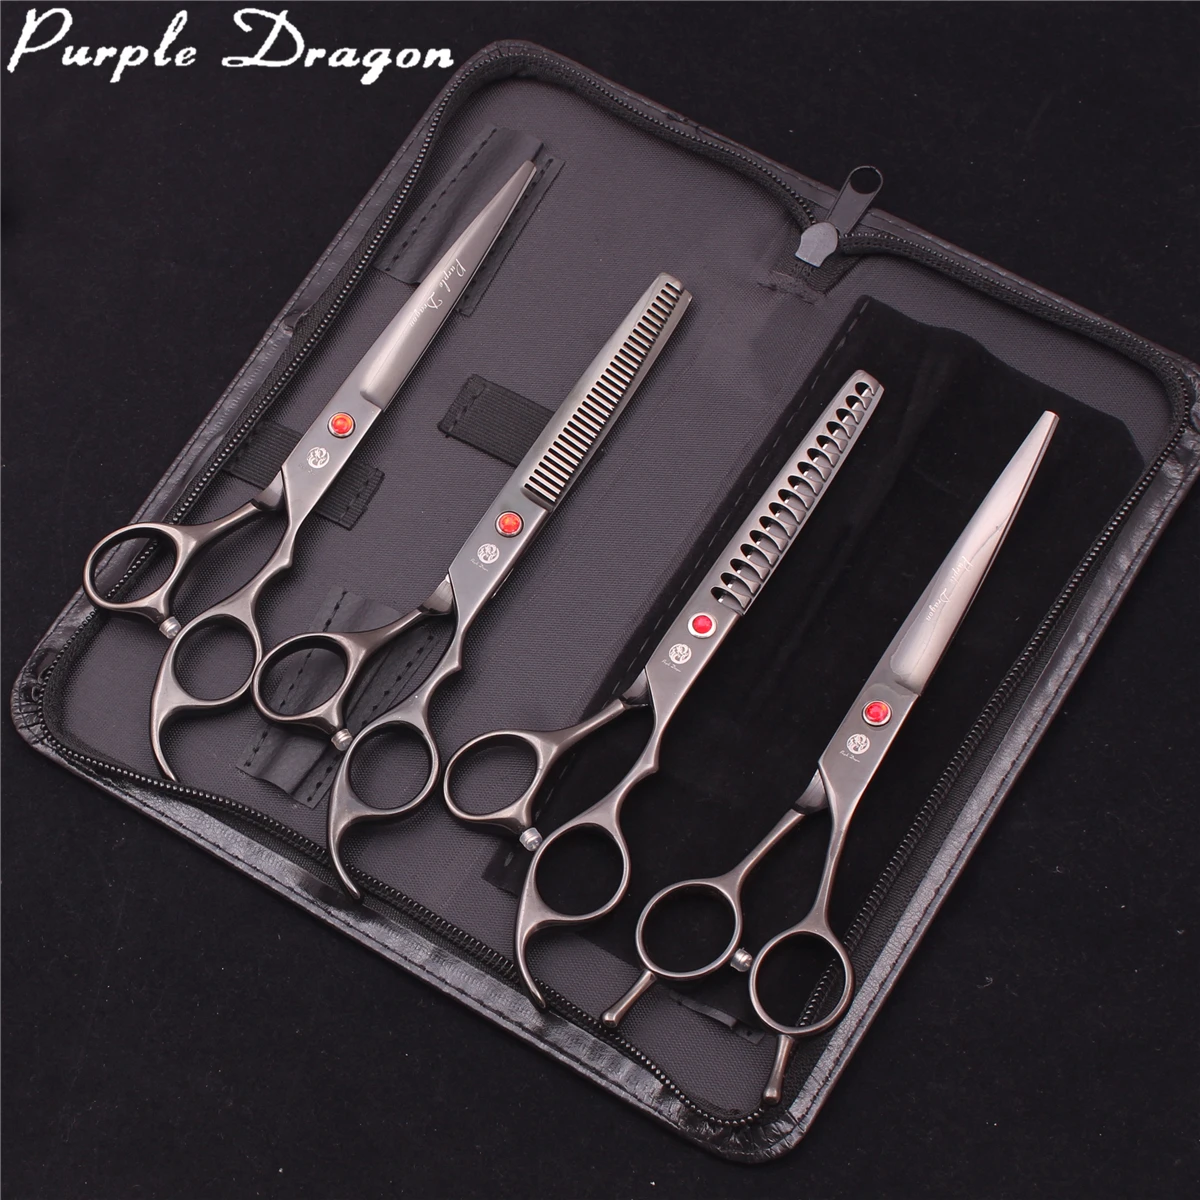 

Purple Dragon Dog Grooming Scissors Set 7" Stainless Steel Pet Straight Scissors Thinning Shears Chunker Curved Scissors Z3012, Red handle